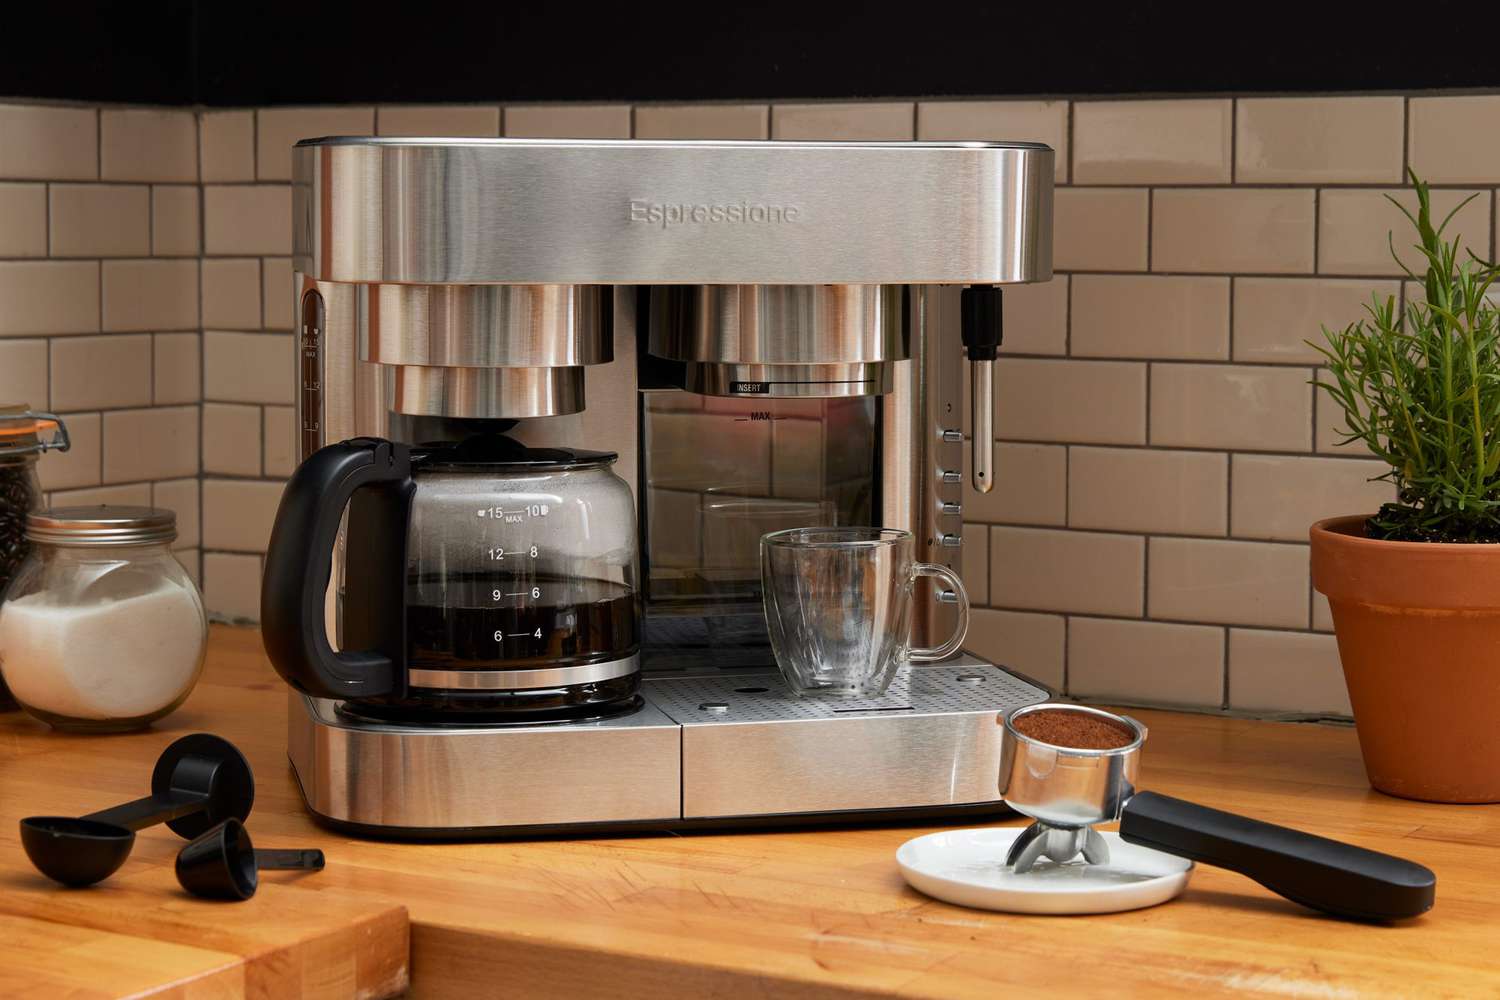 Best Coffee and Espresso Machine Combos of 2023 